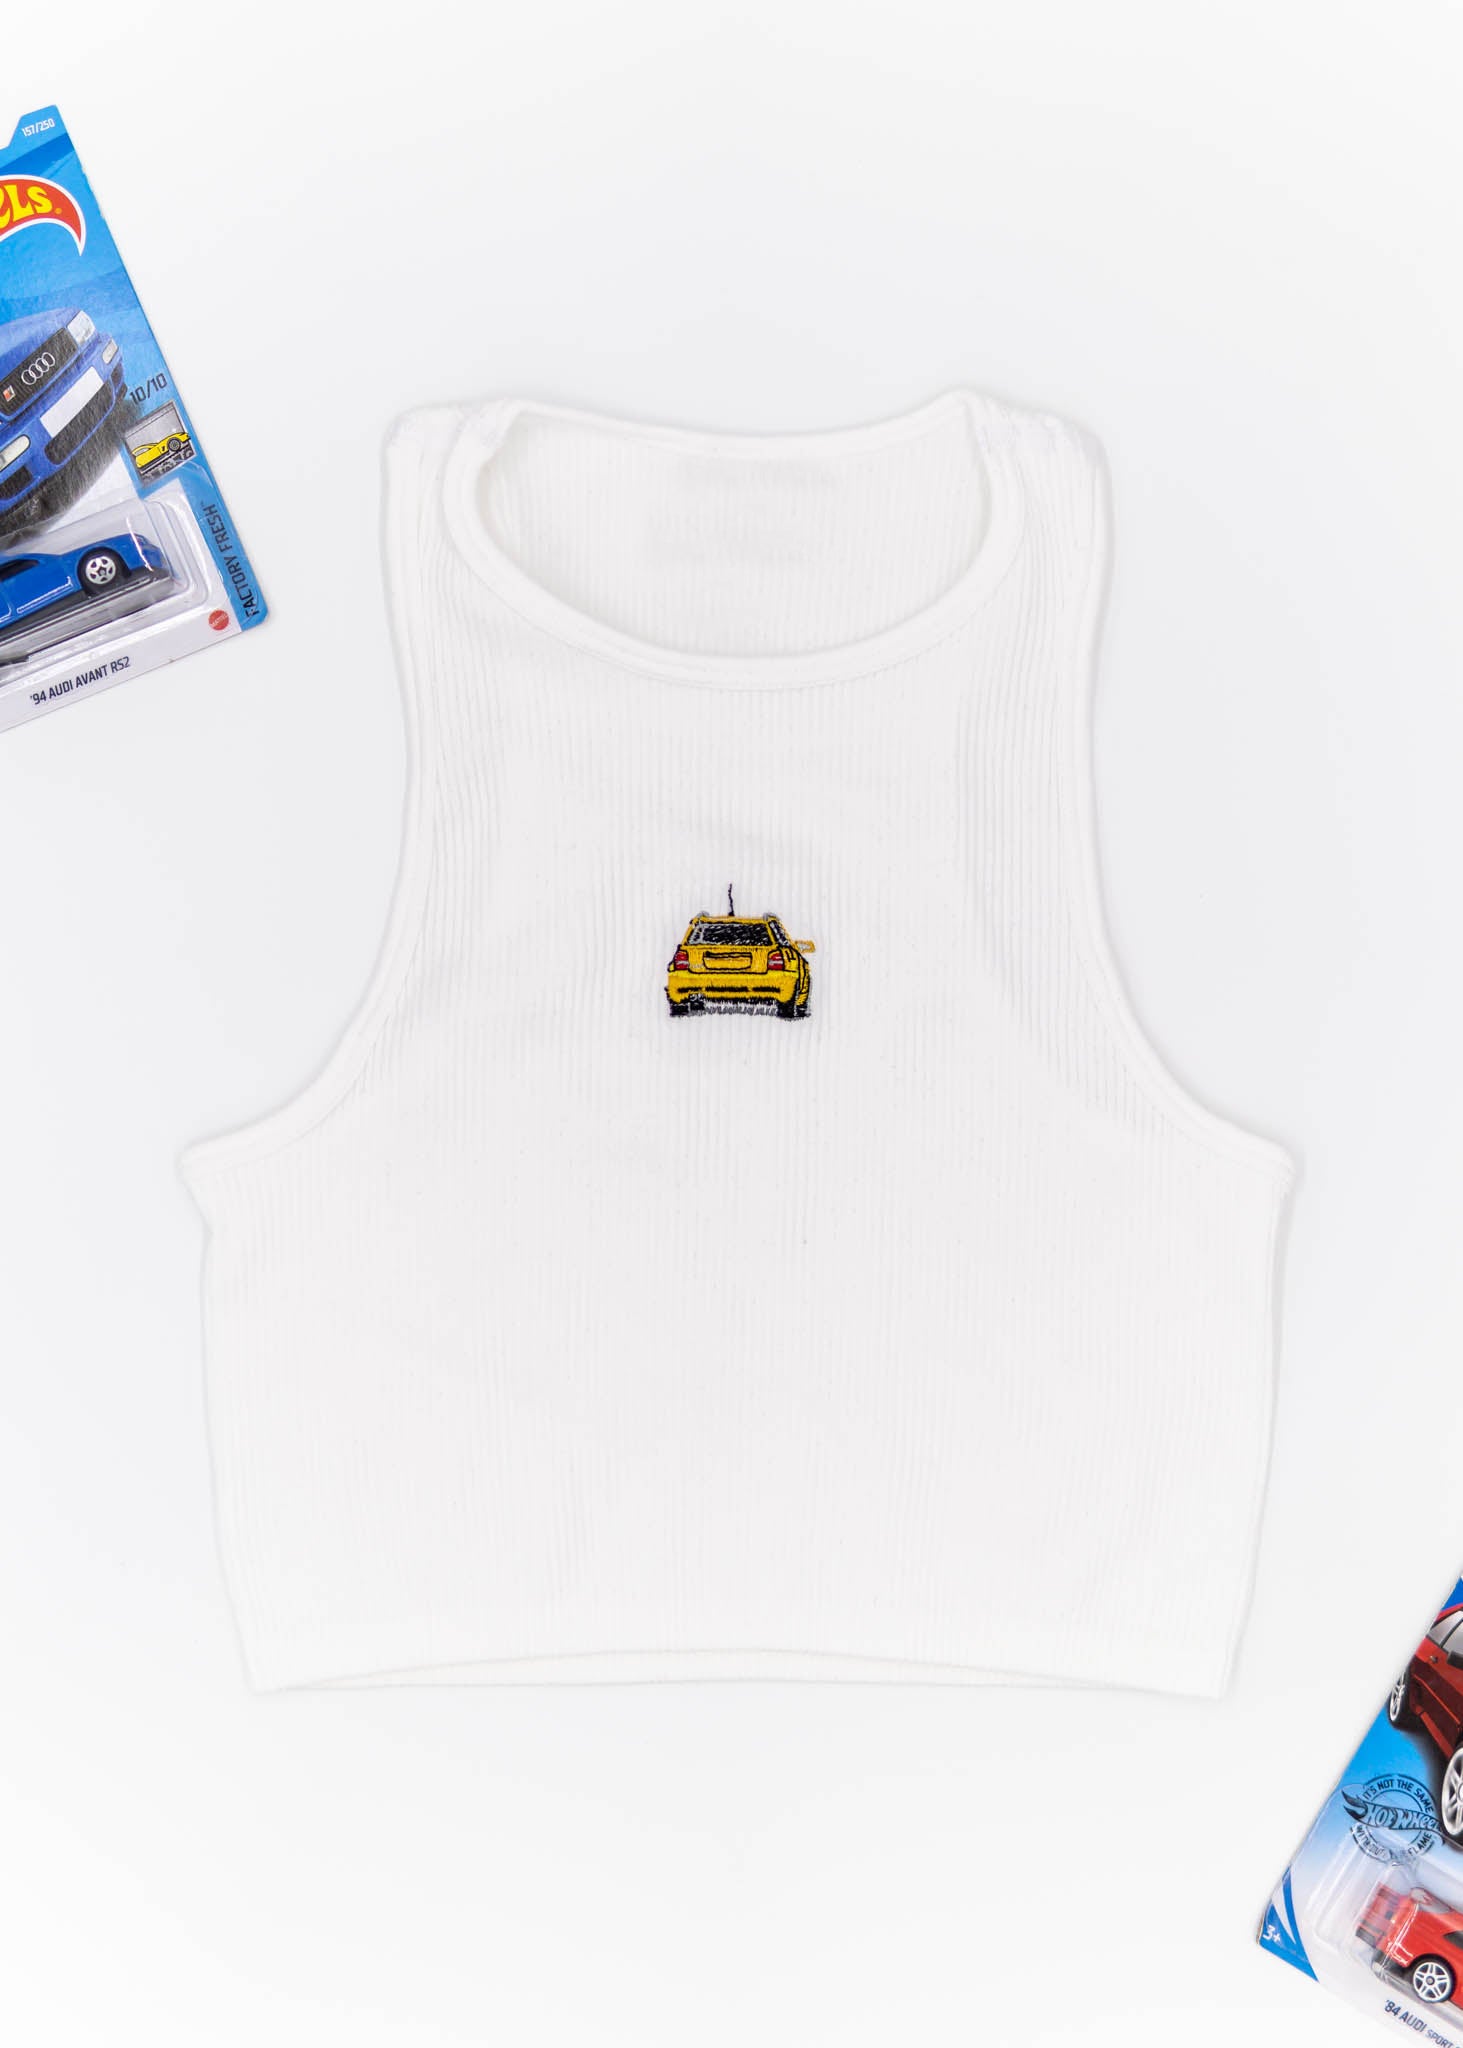 A white Audi crop top for women. Photo is a front view of the top with an embroidered Imola Yellow Audi B5 RS4. Fabric composition is polyester, and elastine. The material is stretchy, ribbed, and non-transparent. The style of this shirt is sleeveless, with a crewneck neckline.